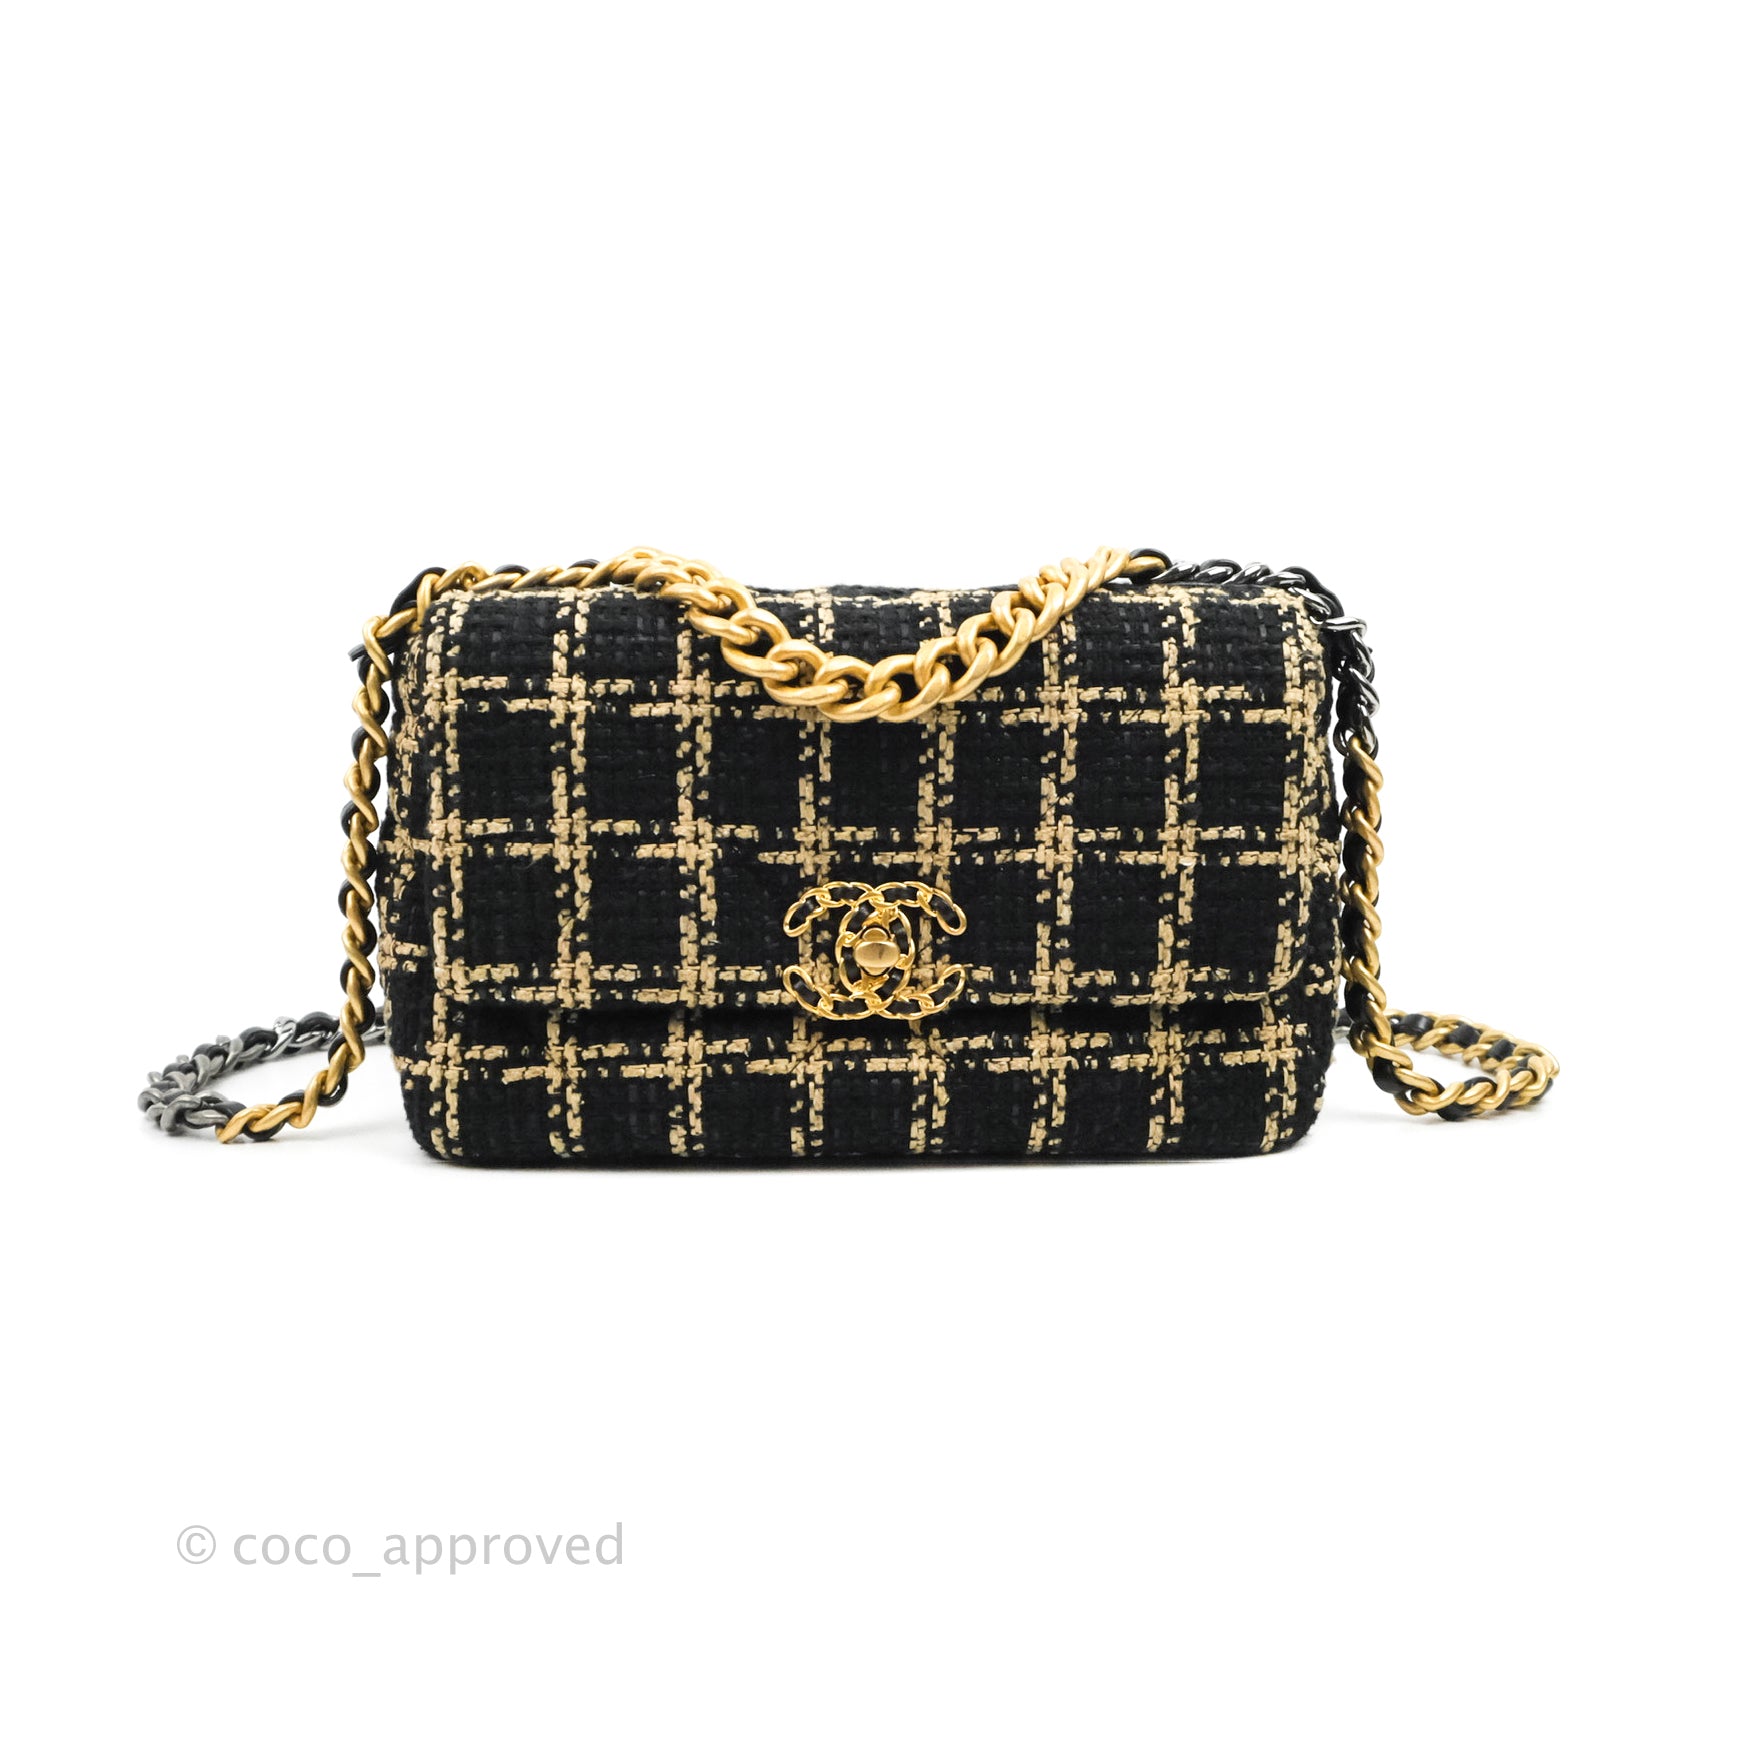 Chanel 19 Small Tweed Black Beige Mixed Hardware